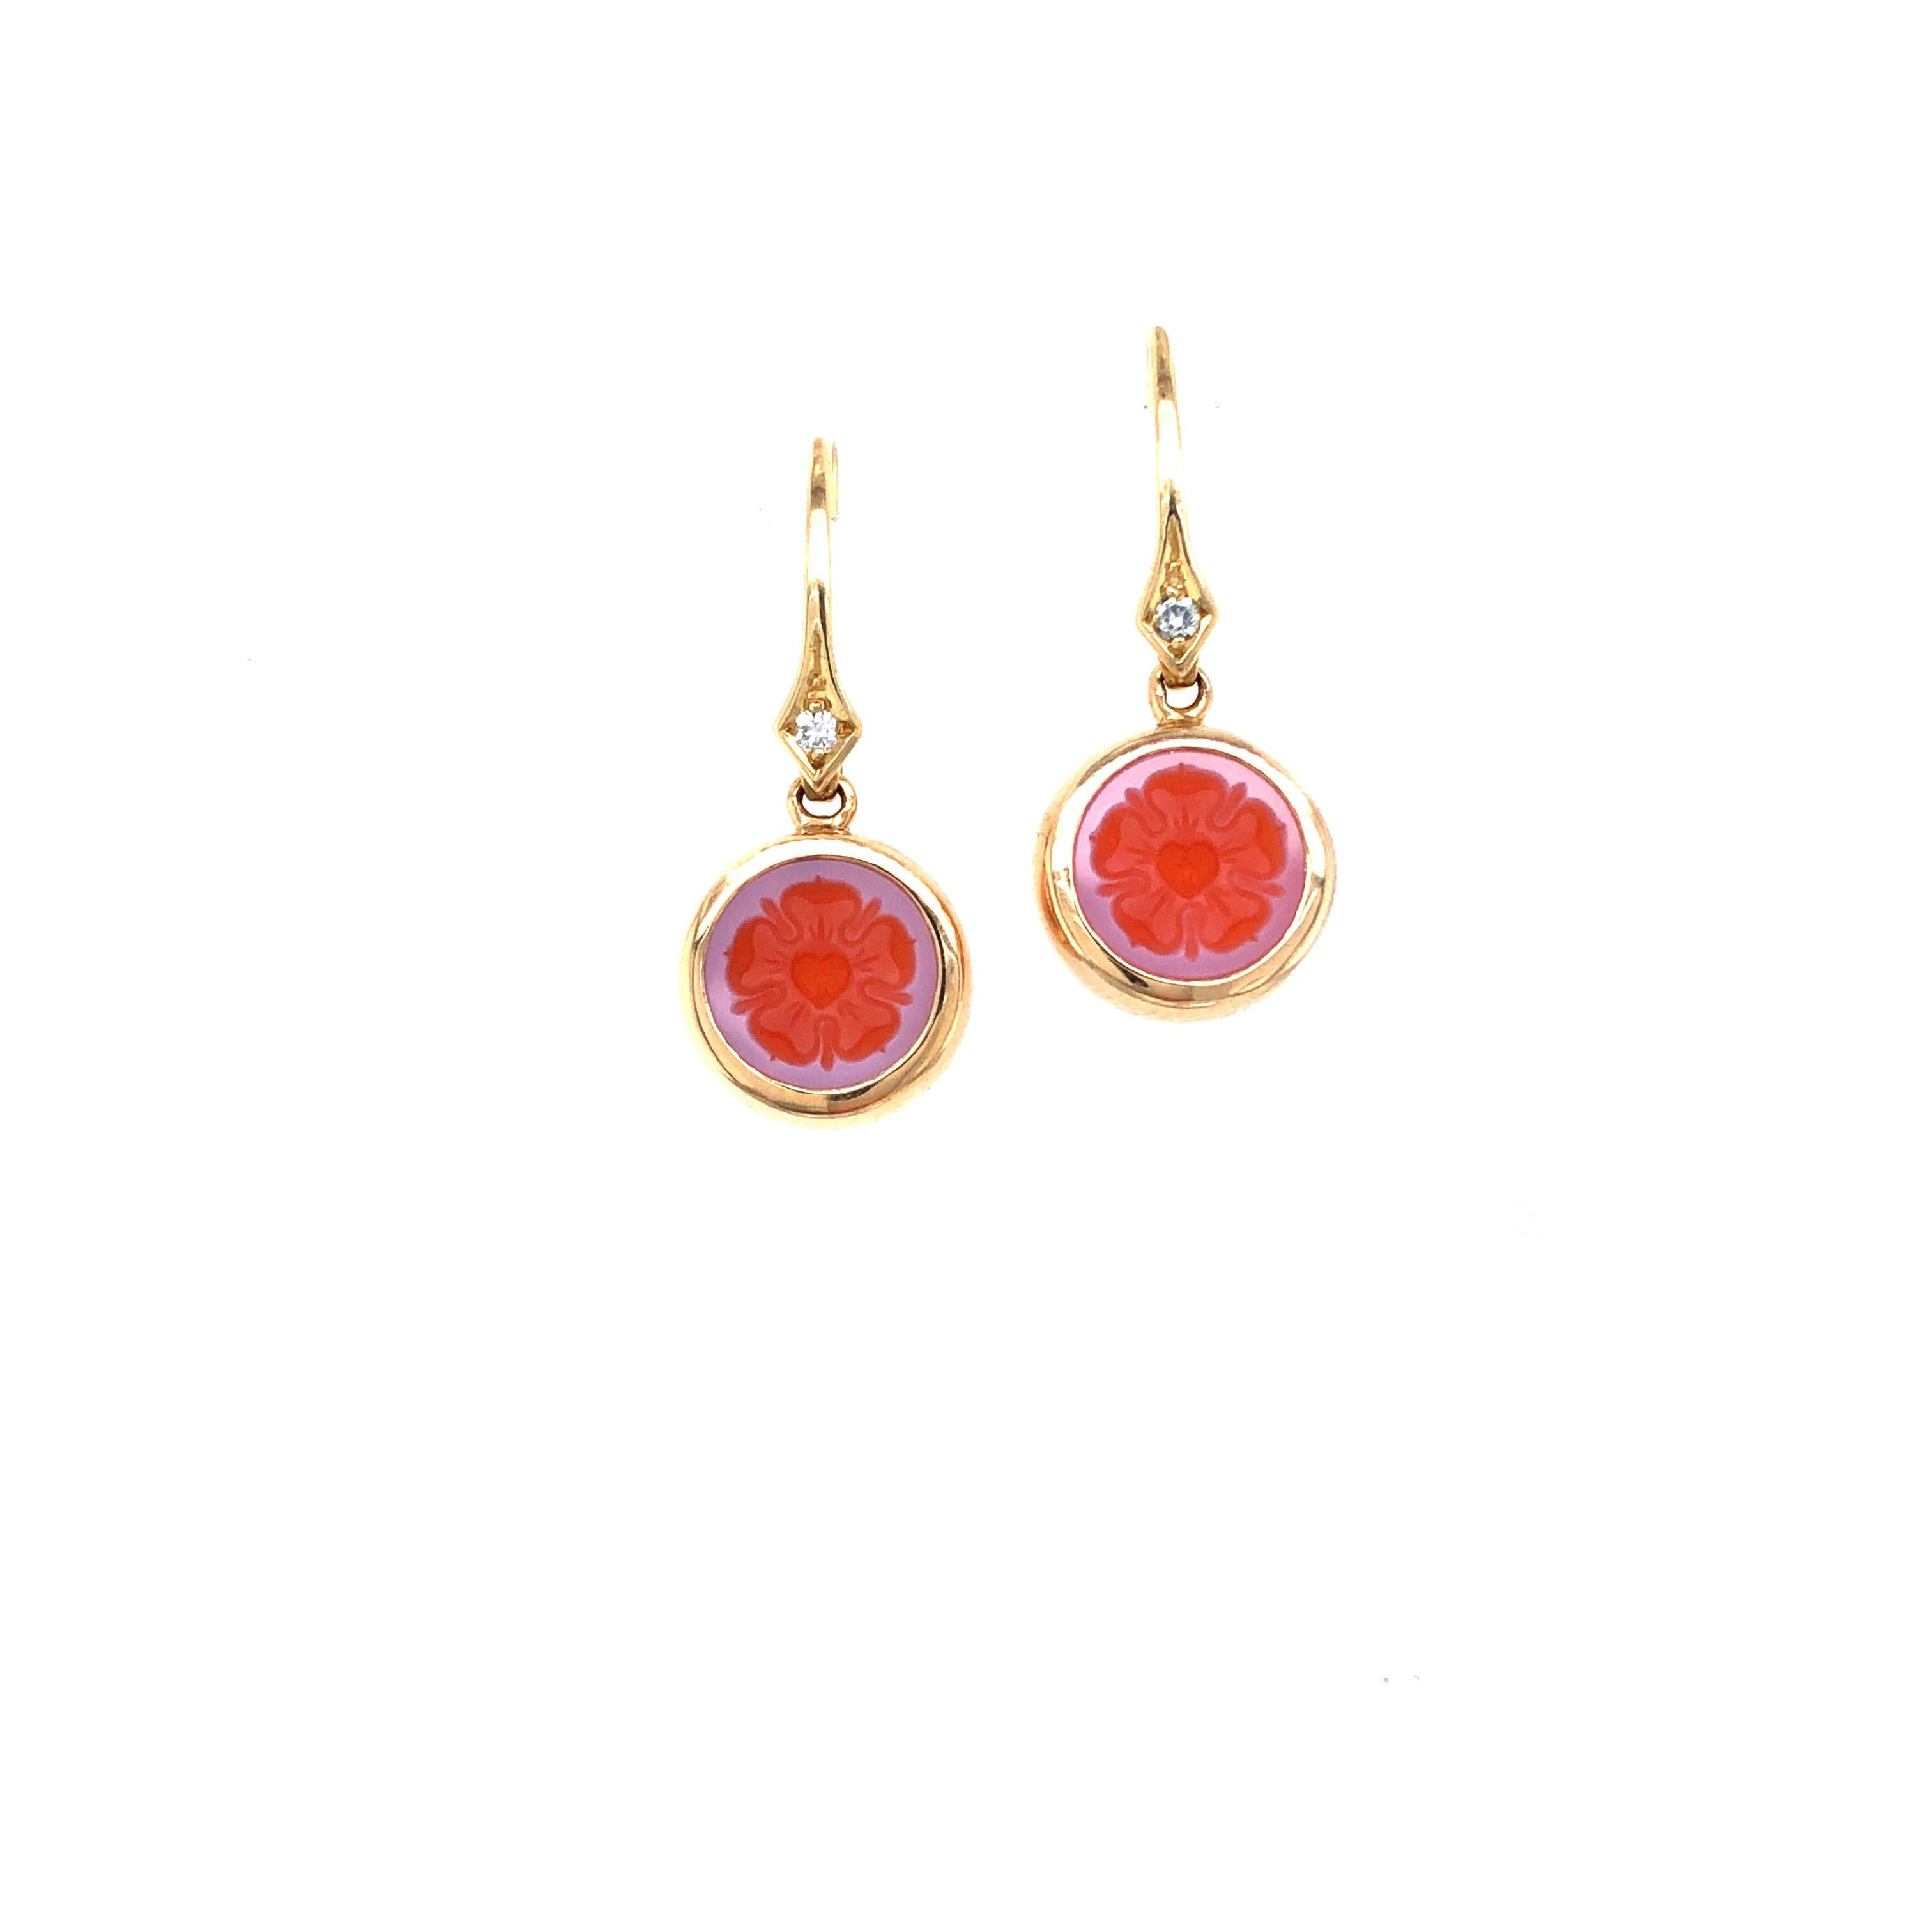 Victor Mayer Darcy & Elizabeth Carnelian Earrings 18k Yellow Gold with Diamonds

VICTOR MAYER is a fine jewelry house known for its sophisticated craftsmanship. Since 1989, the company has been closely associated with the Fabergé name as a